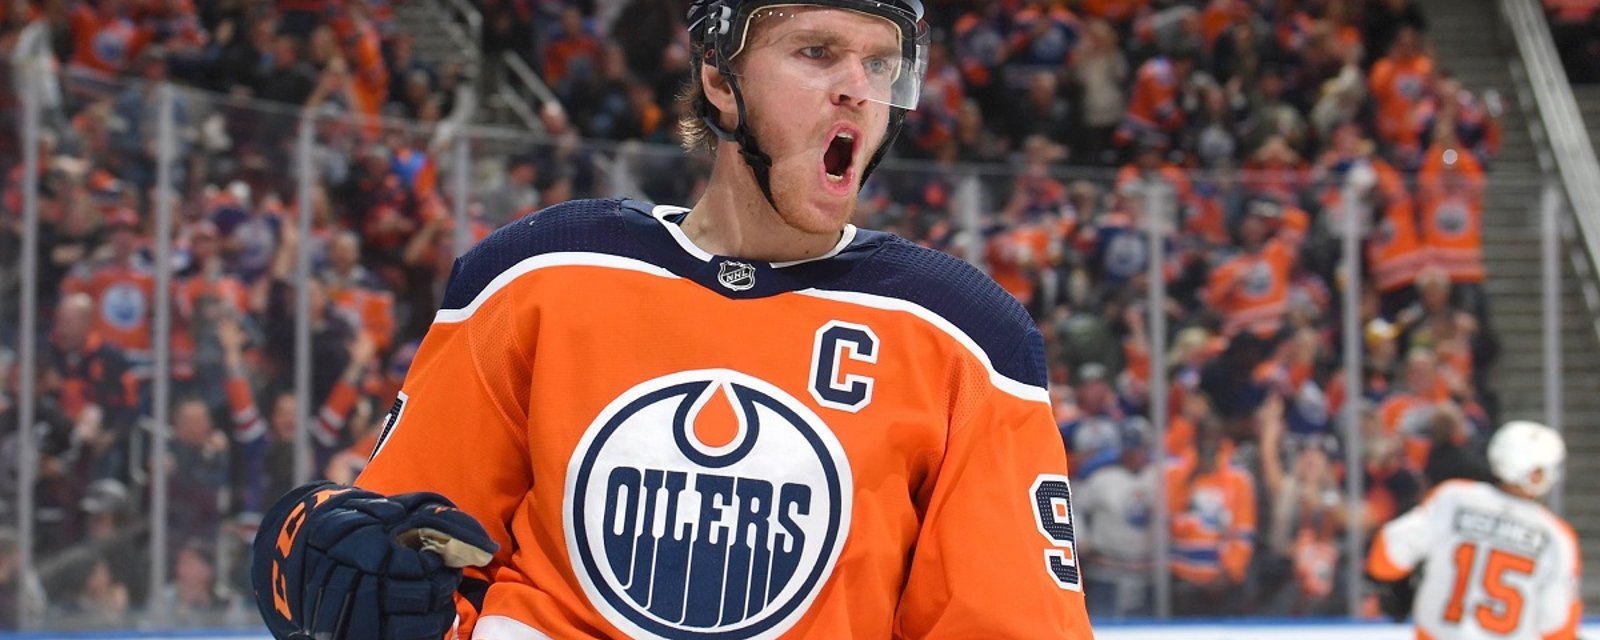 Oilers set several new records in win over Flames